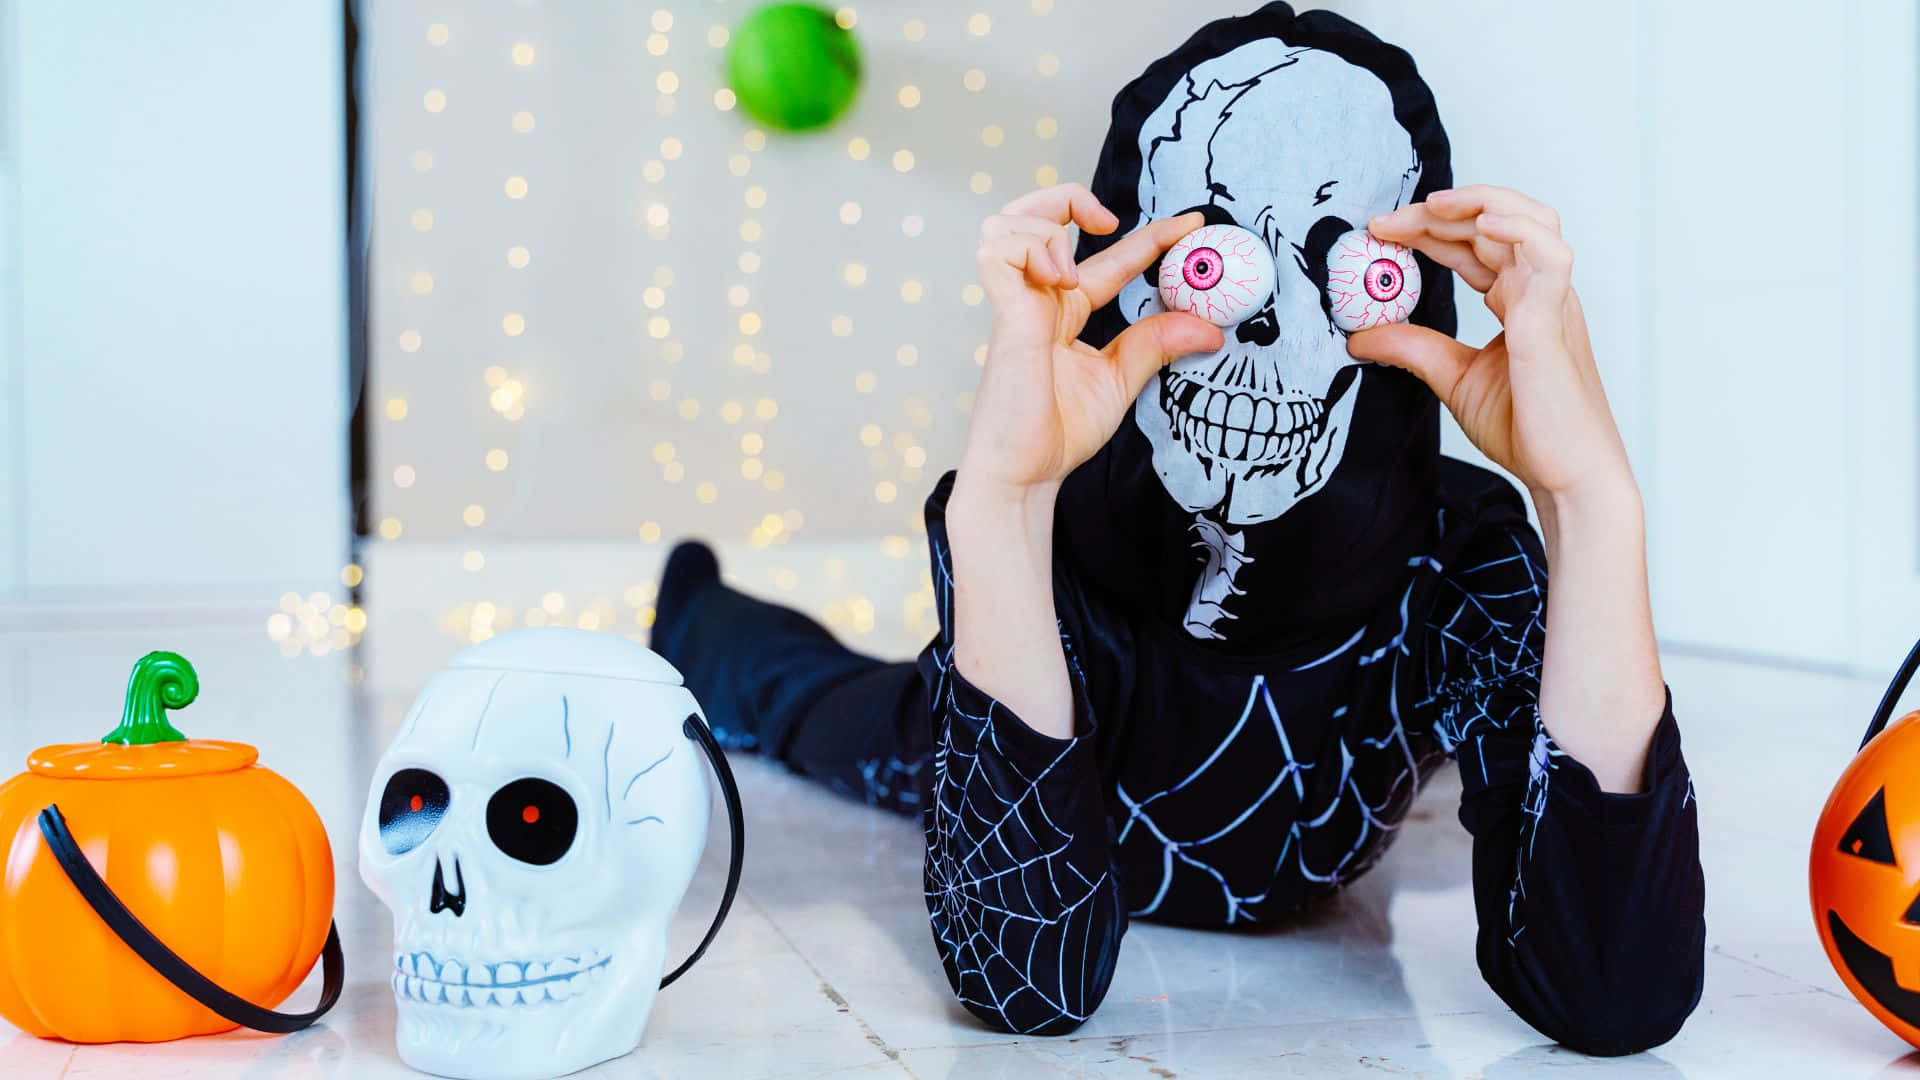 Get your Creep on with these Skeleton Costumes Wallpaper